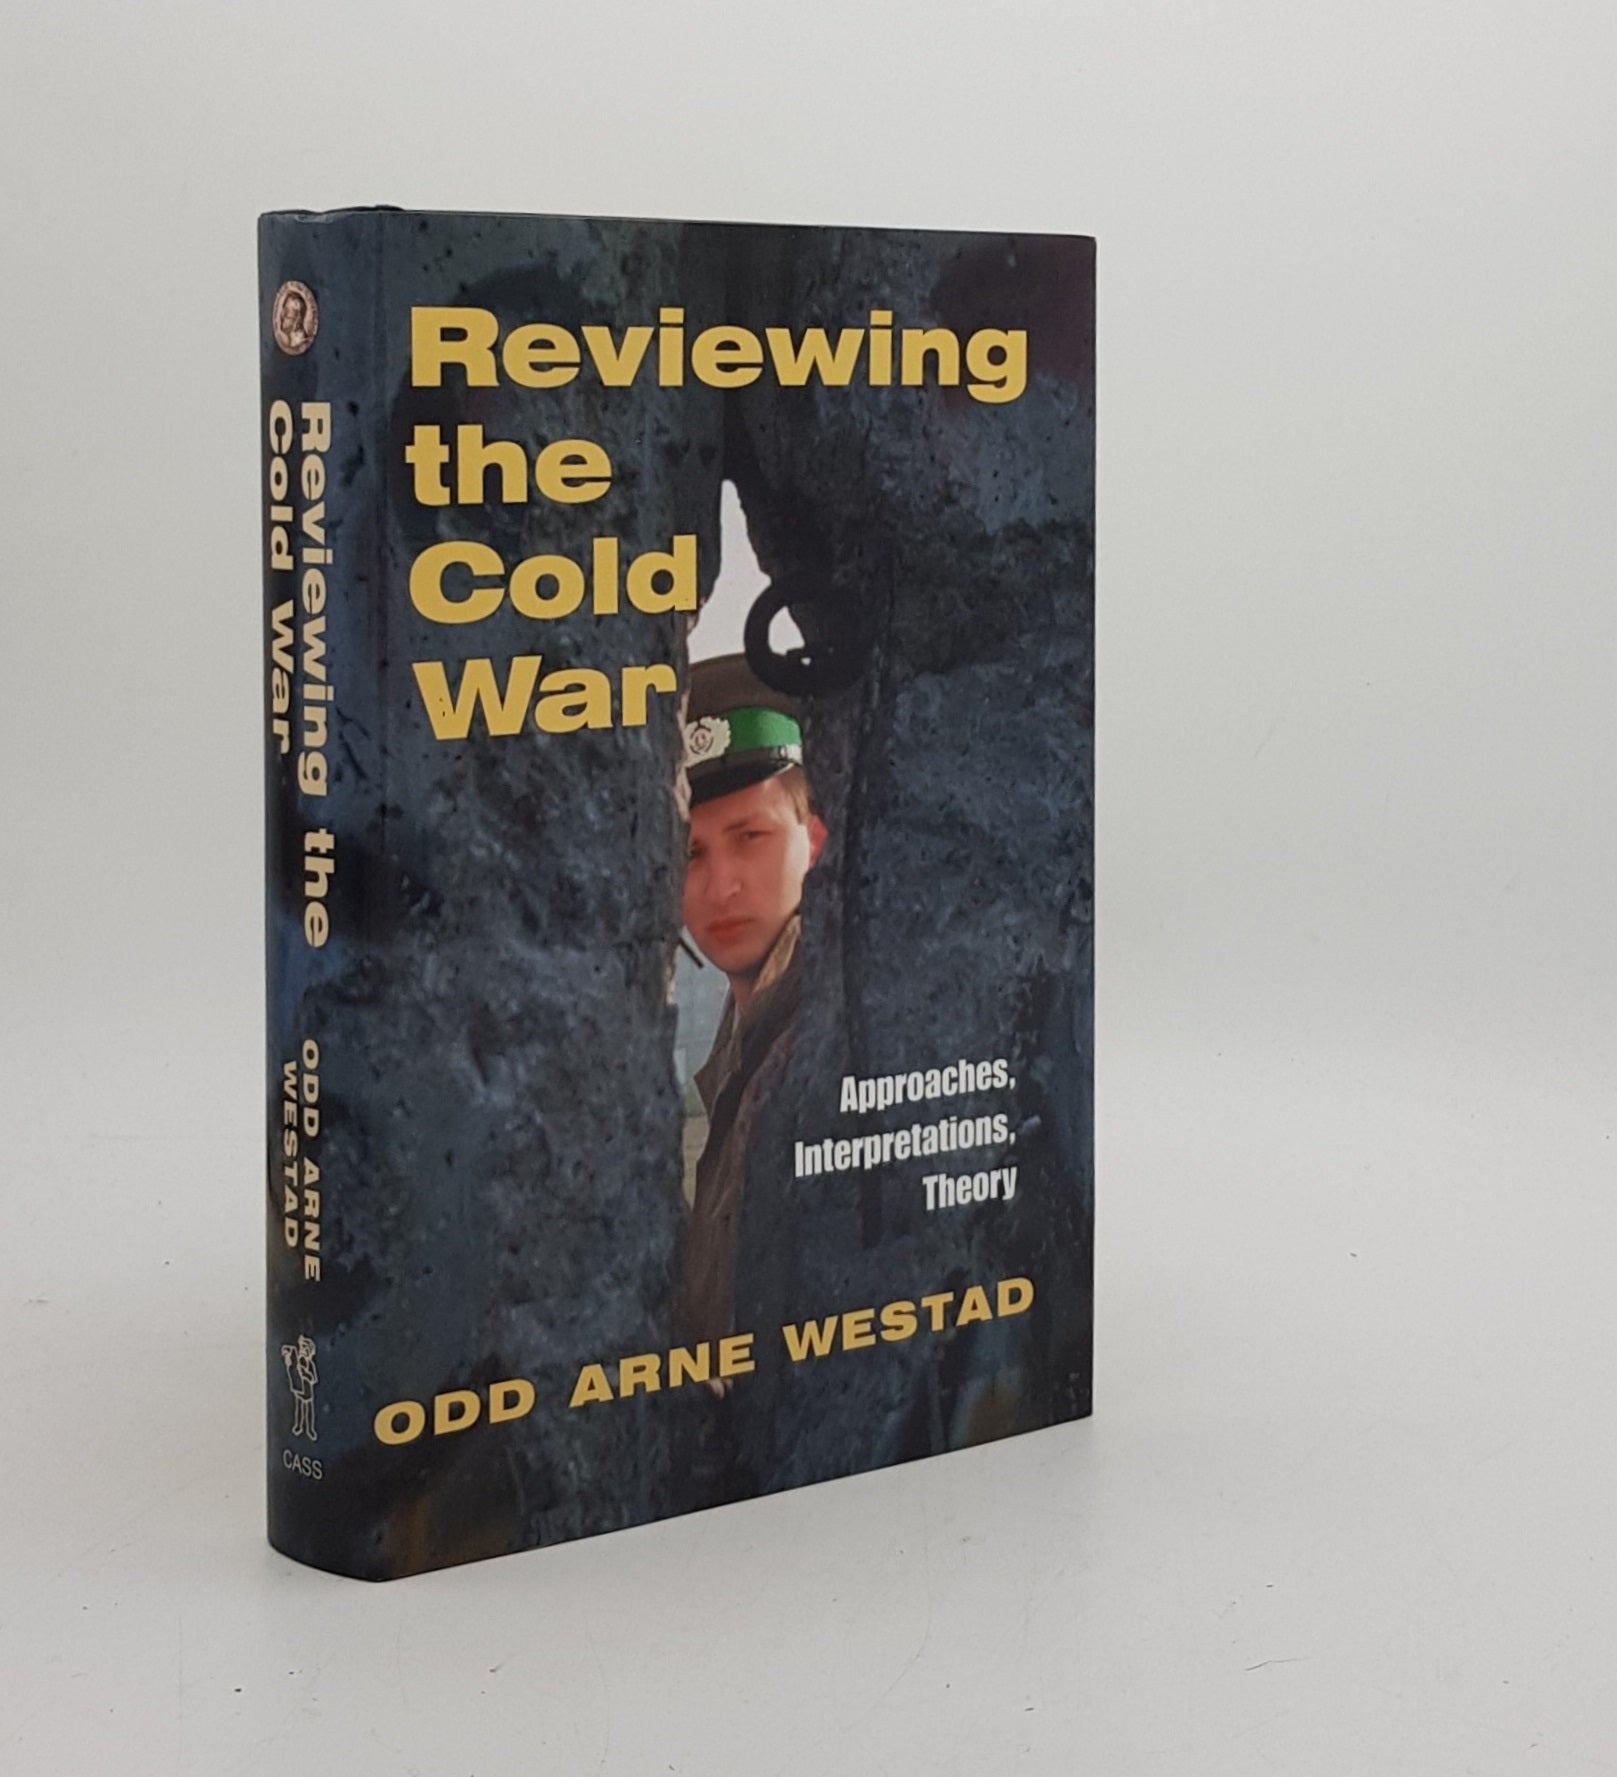 WESTAD Odd Arne - Reviewing the Cold War Approaches Interpretations Theory